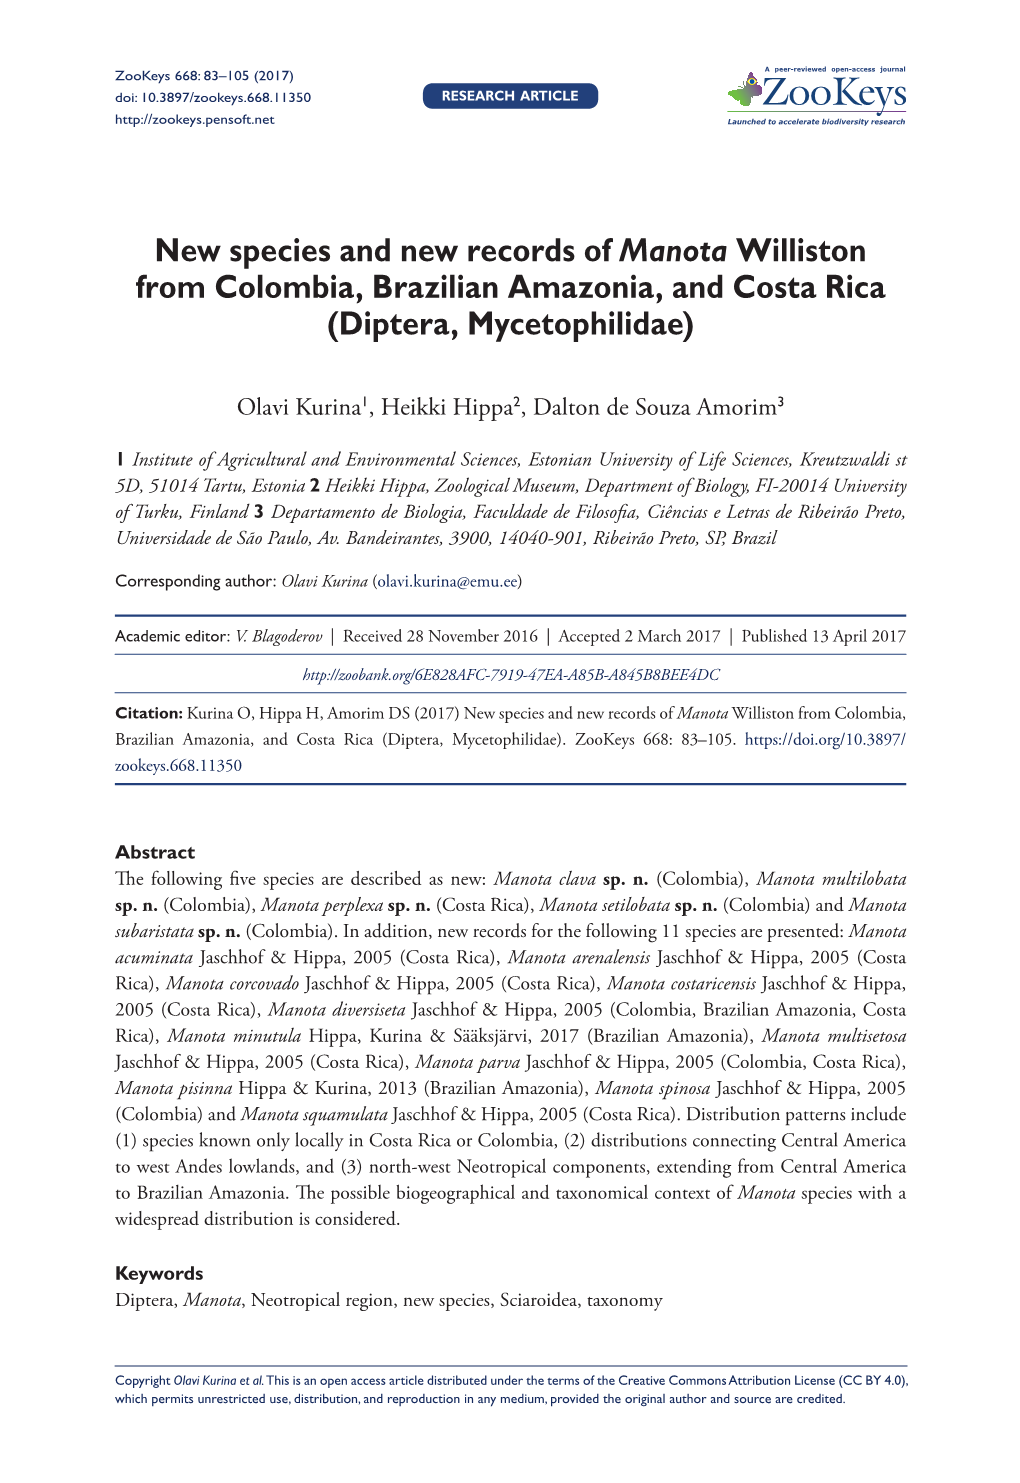 ﻿New Species and New Records of Manota Williston from Colombia